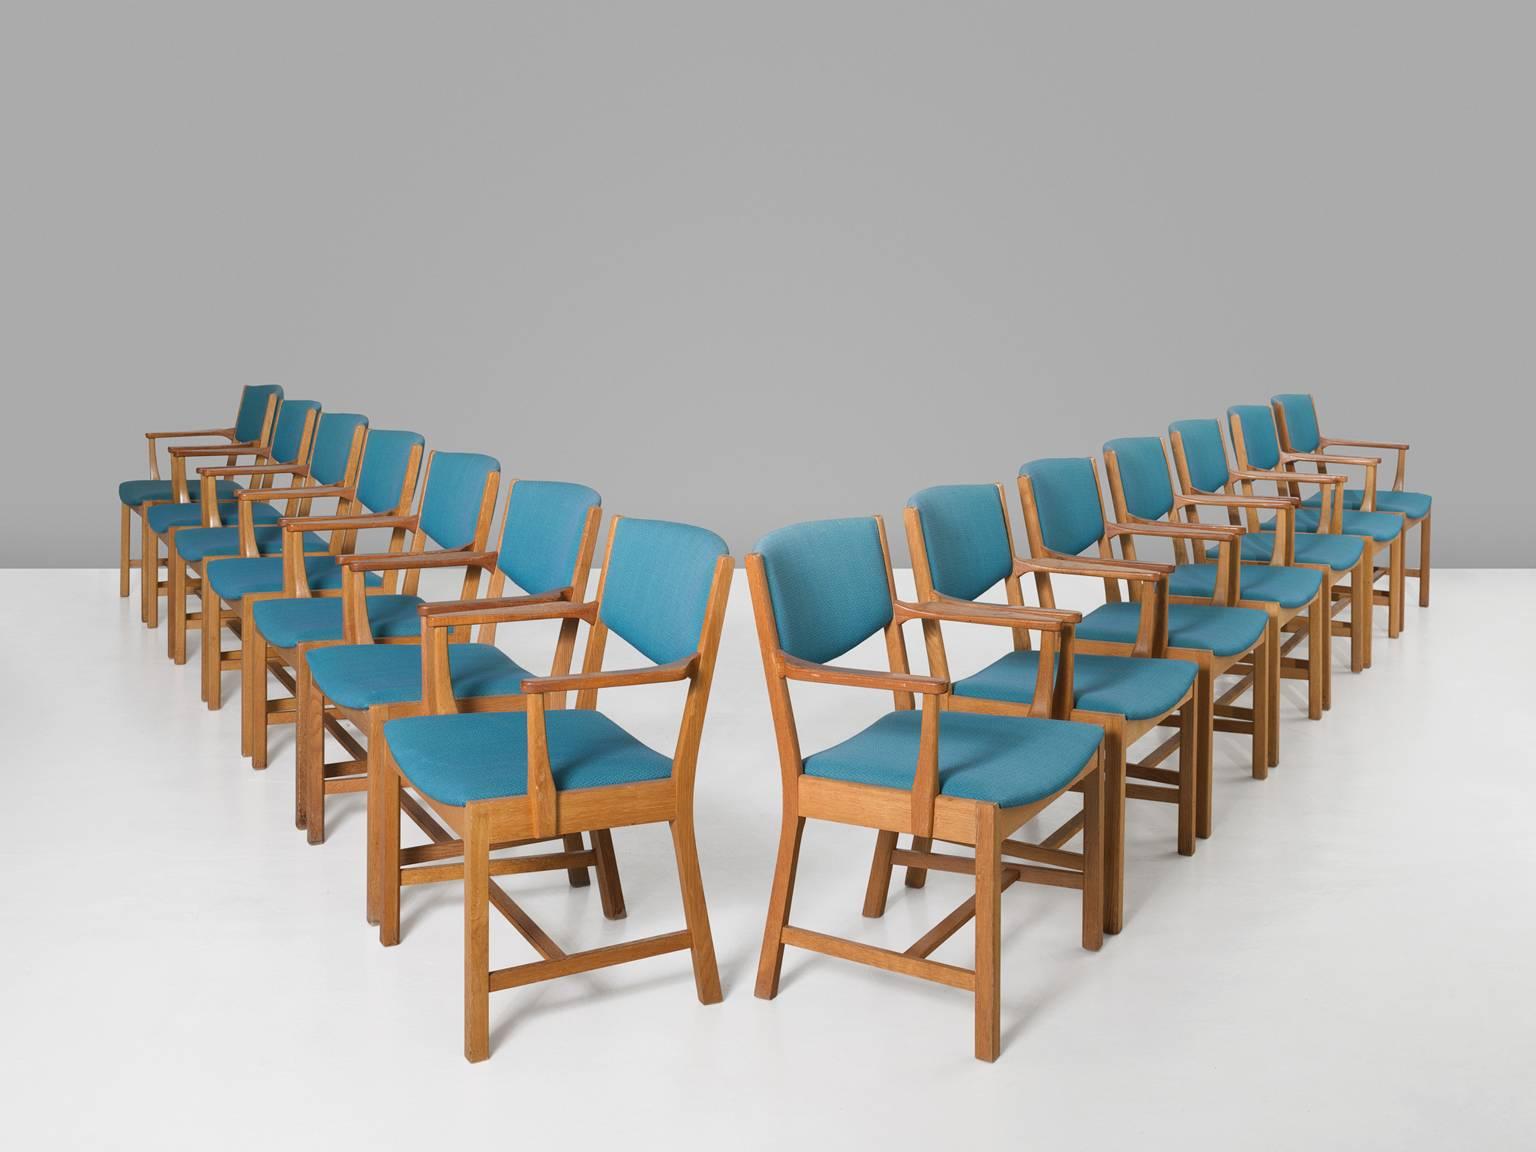 Set of 14 dining chairs, in oak and fabric, for Sorø Stolefabrik, Denmark, 1950s.

Large set of dining room chairs in oak and blue fabric upholstery. The wooden frame shows beautiful lines. Quite cubic and straight on the front and nicely curved